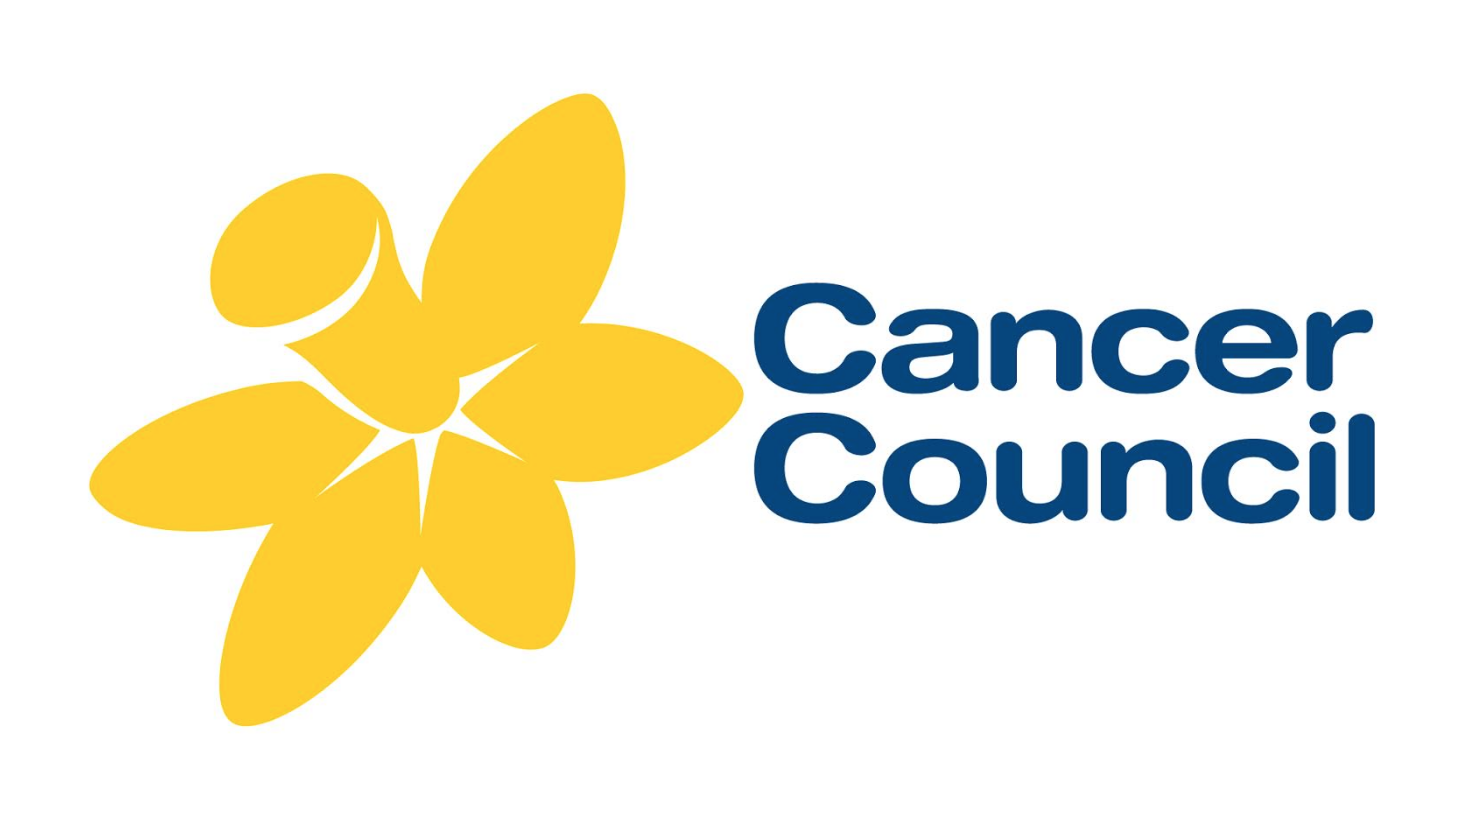 Cancer Council appoints VCCP to produce national campaign ...